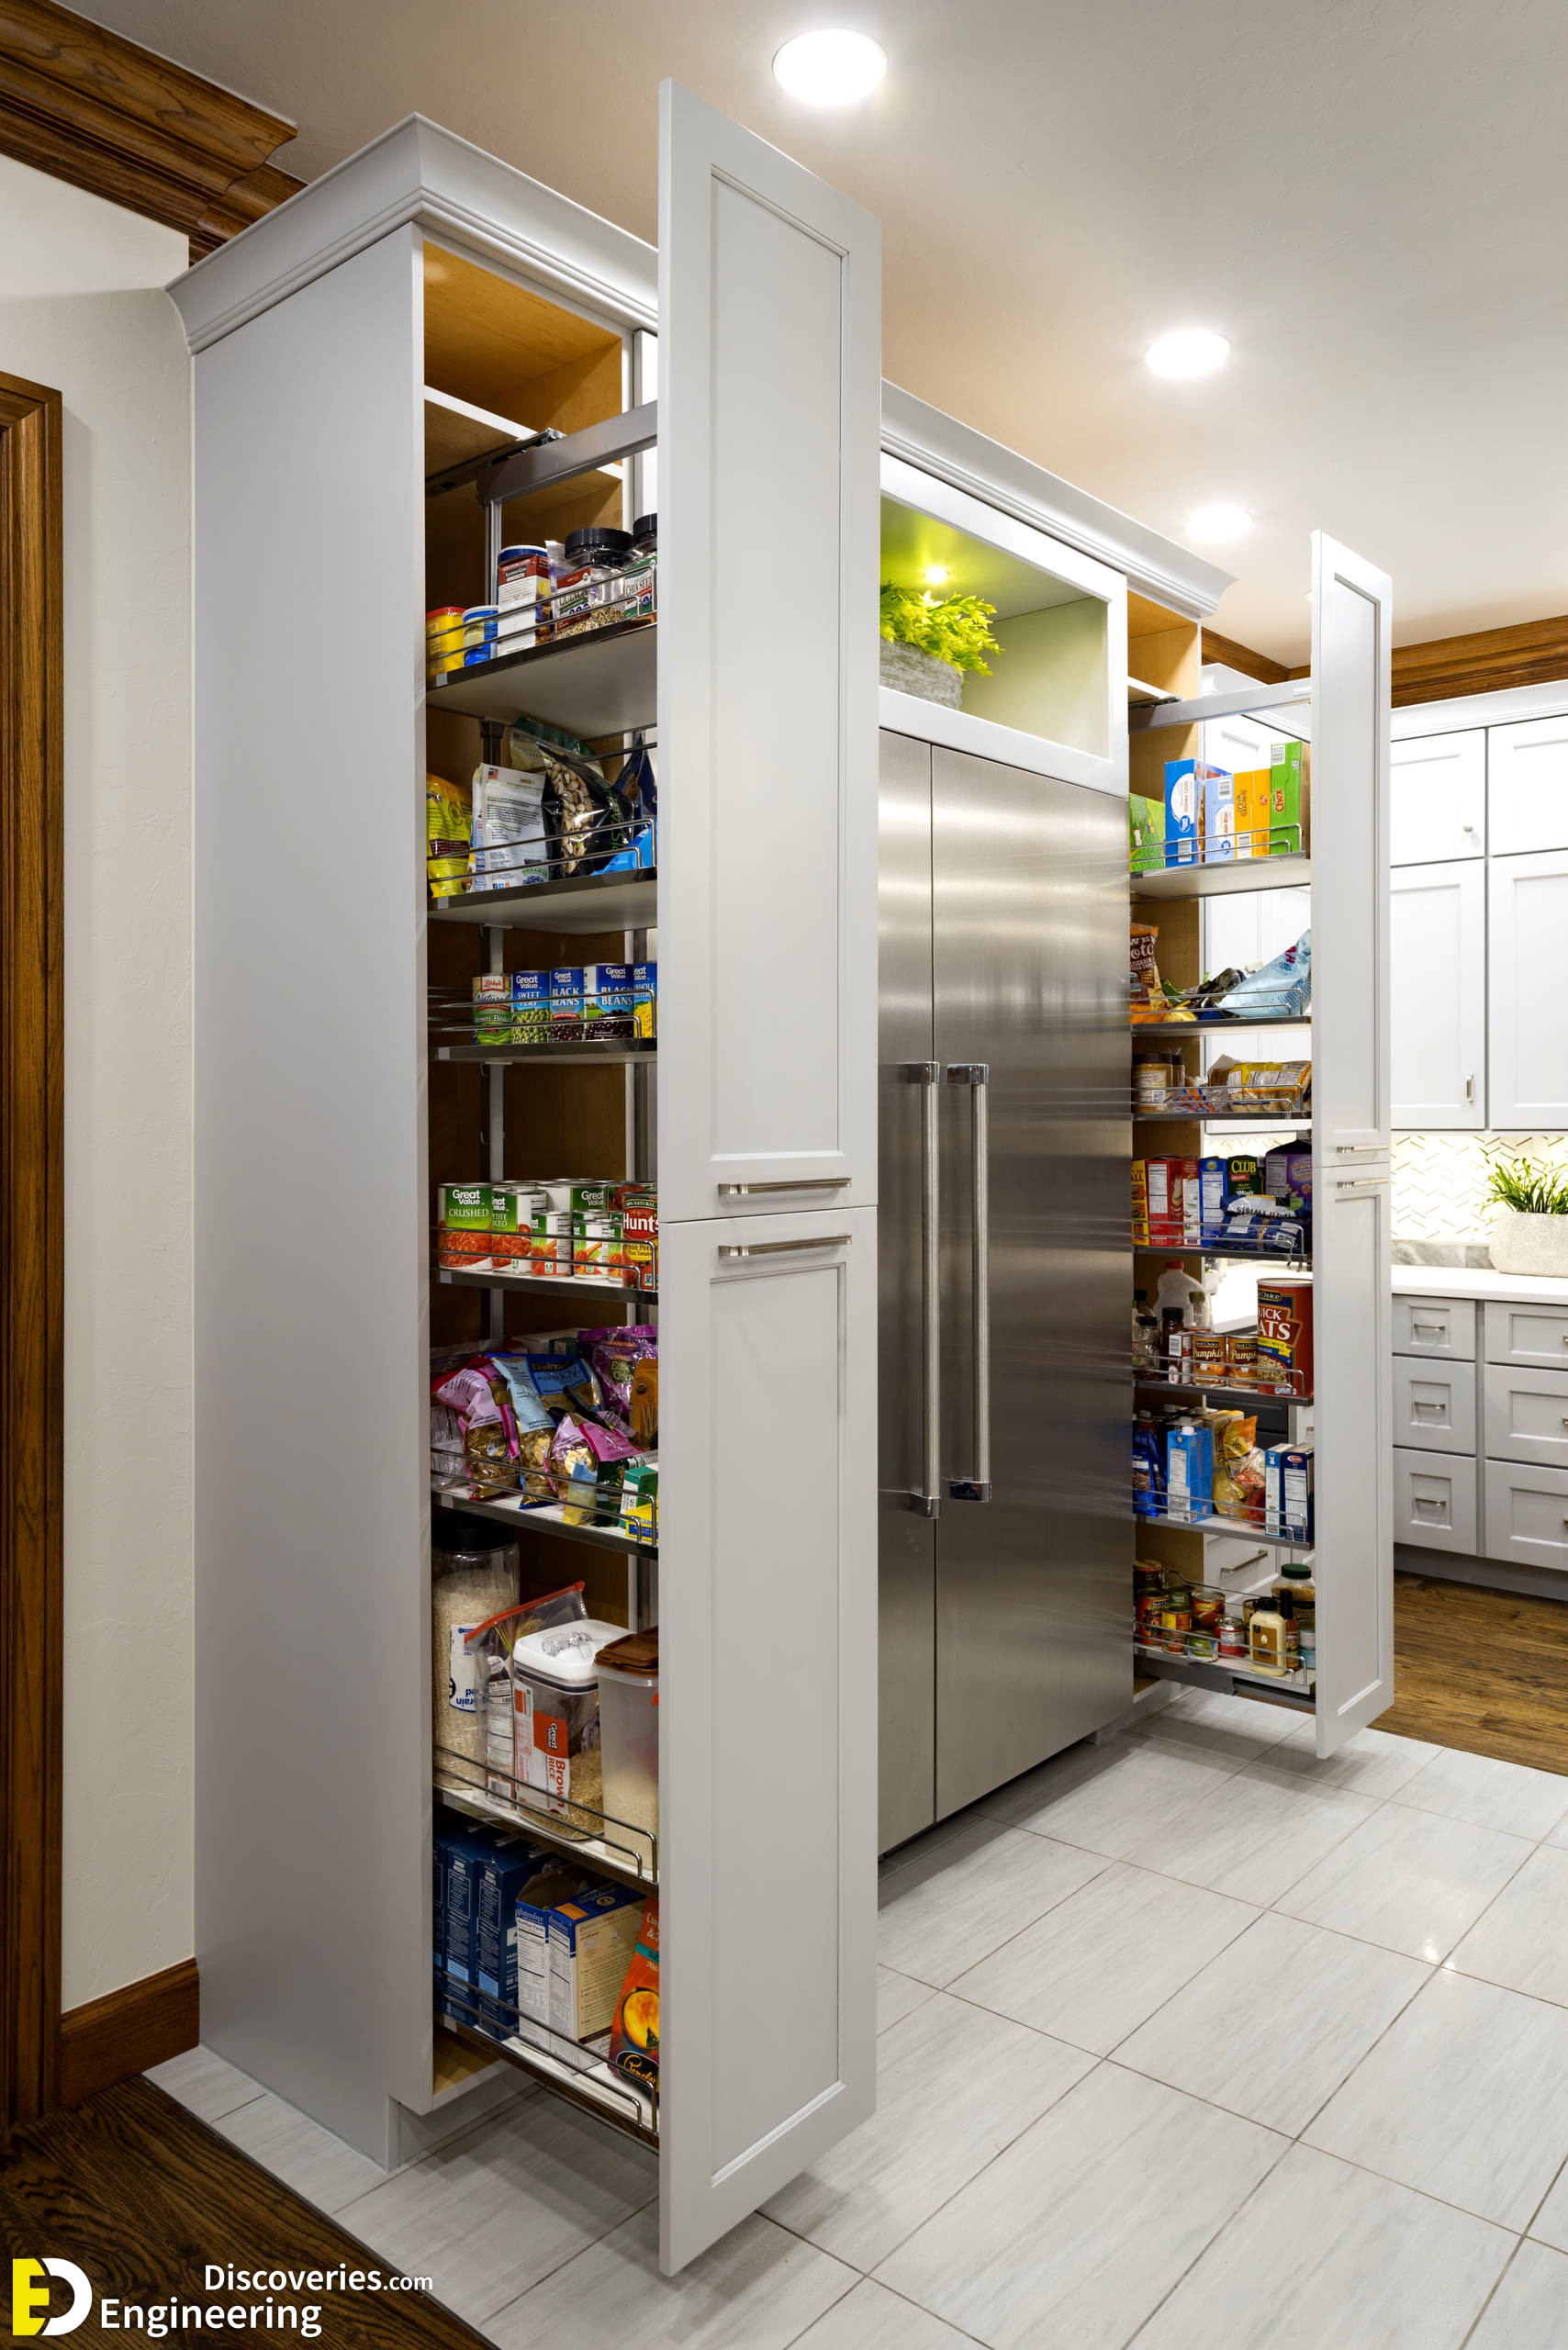 https://engineeringdiscoveries.com/36-engineering-discoveries-maximize-your-space-brilliant-kitchen-organization-ideas-for-effortless-cabinet-storage/